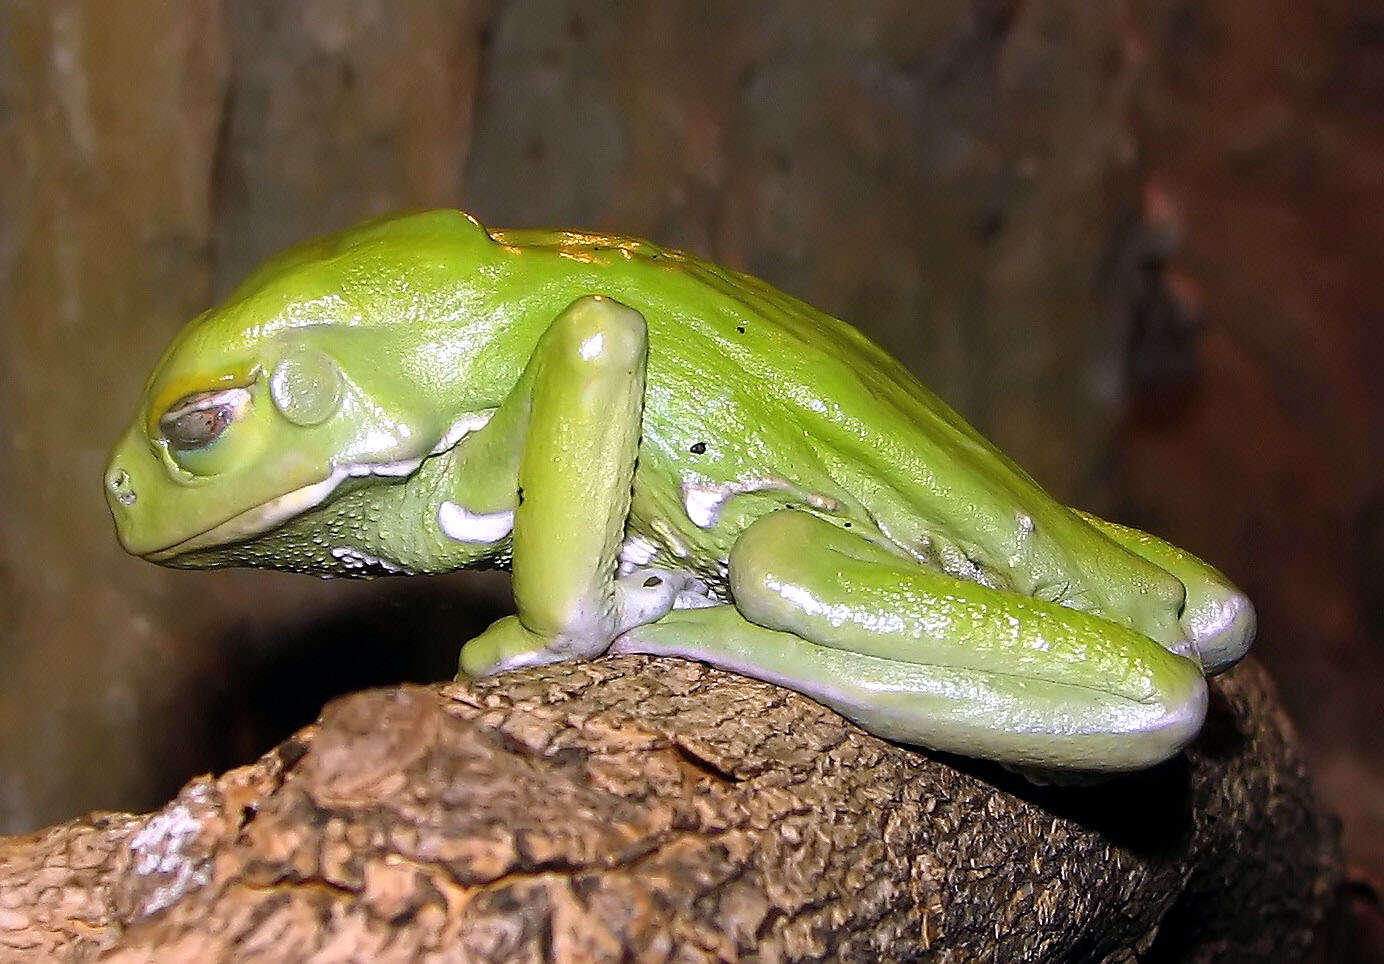 Image of painted-belly leaf frog